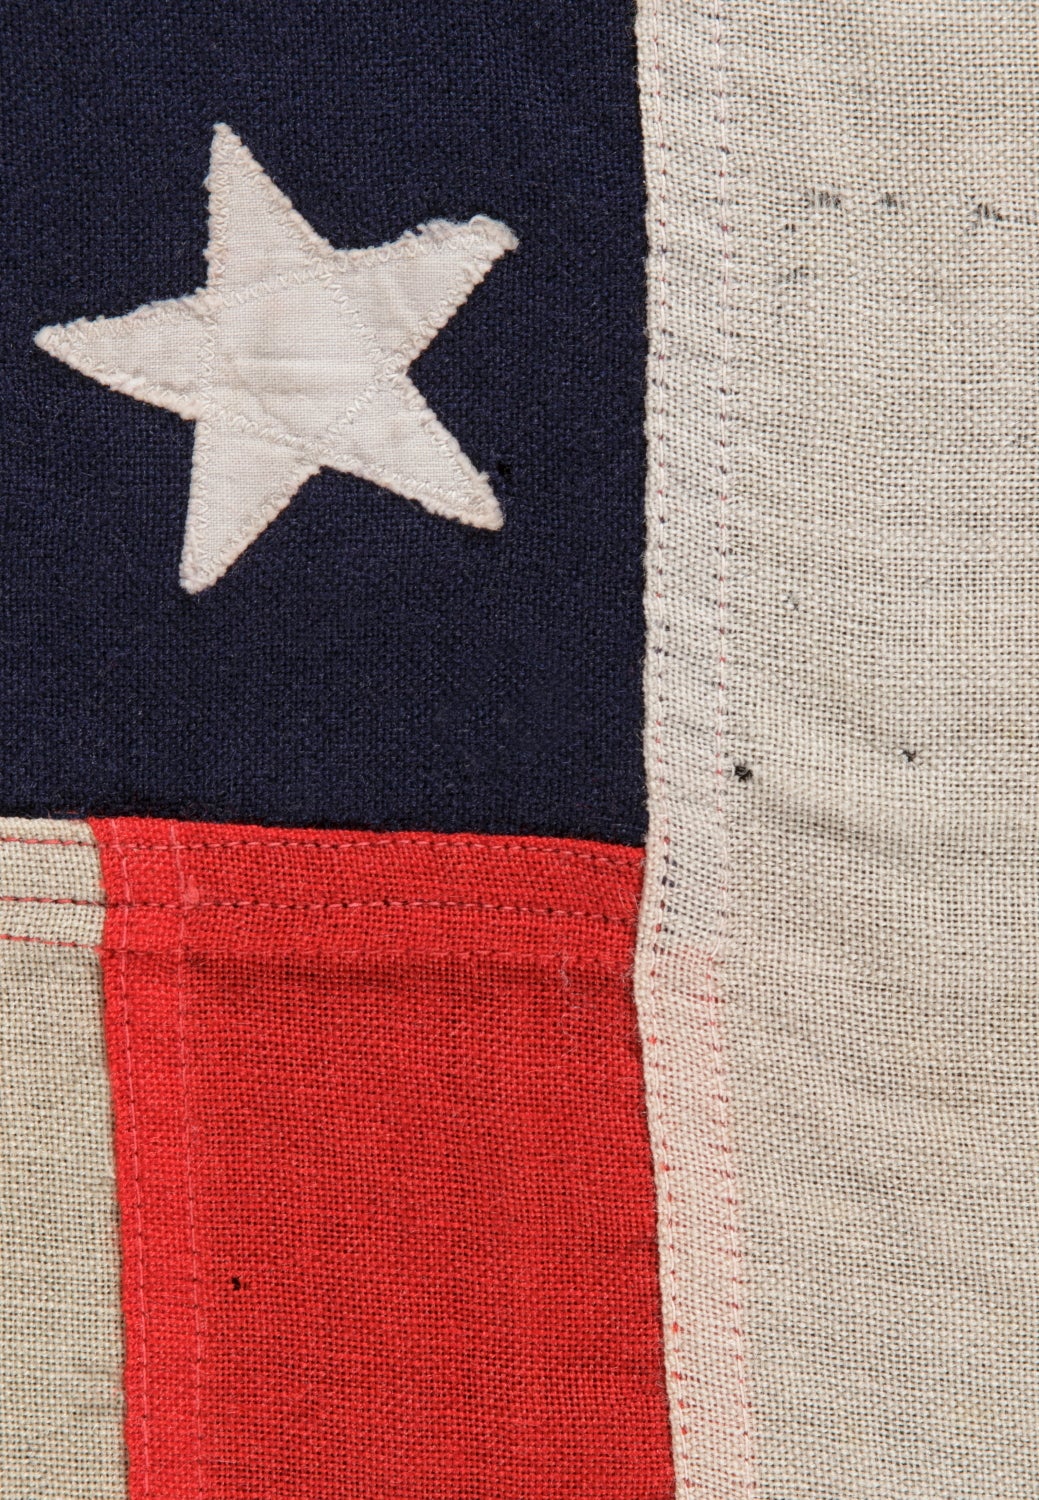 Other 48-Star U.S. Navy Small Boat Ensign, Made at Mare Island, California WWII, 1943